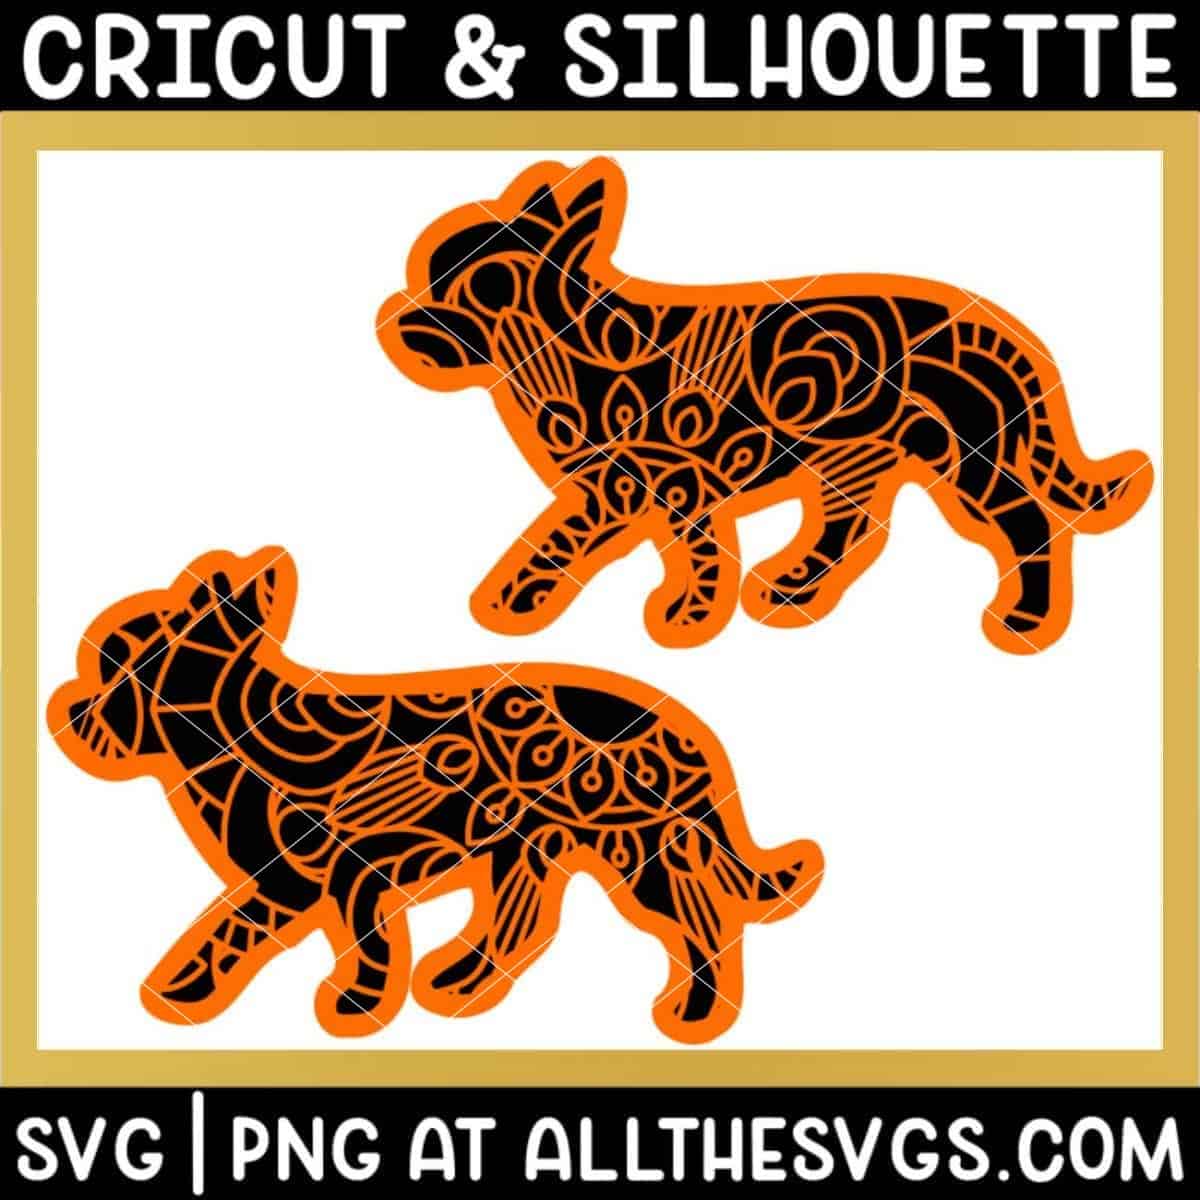 2 versions of chihuahua dog svg file mandala center from front legs and tail.